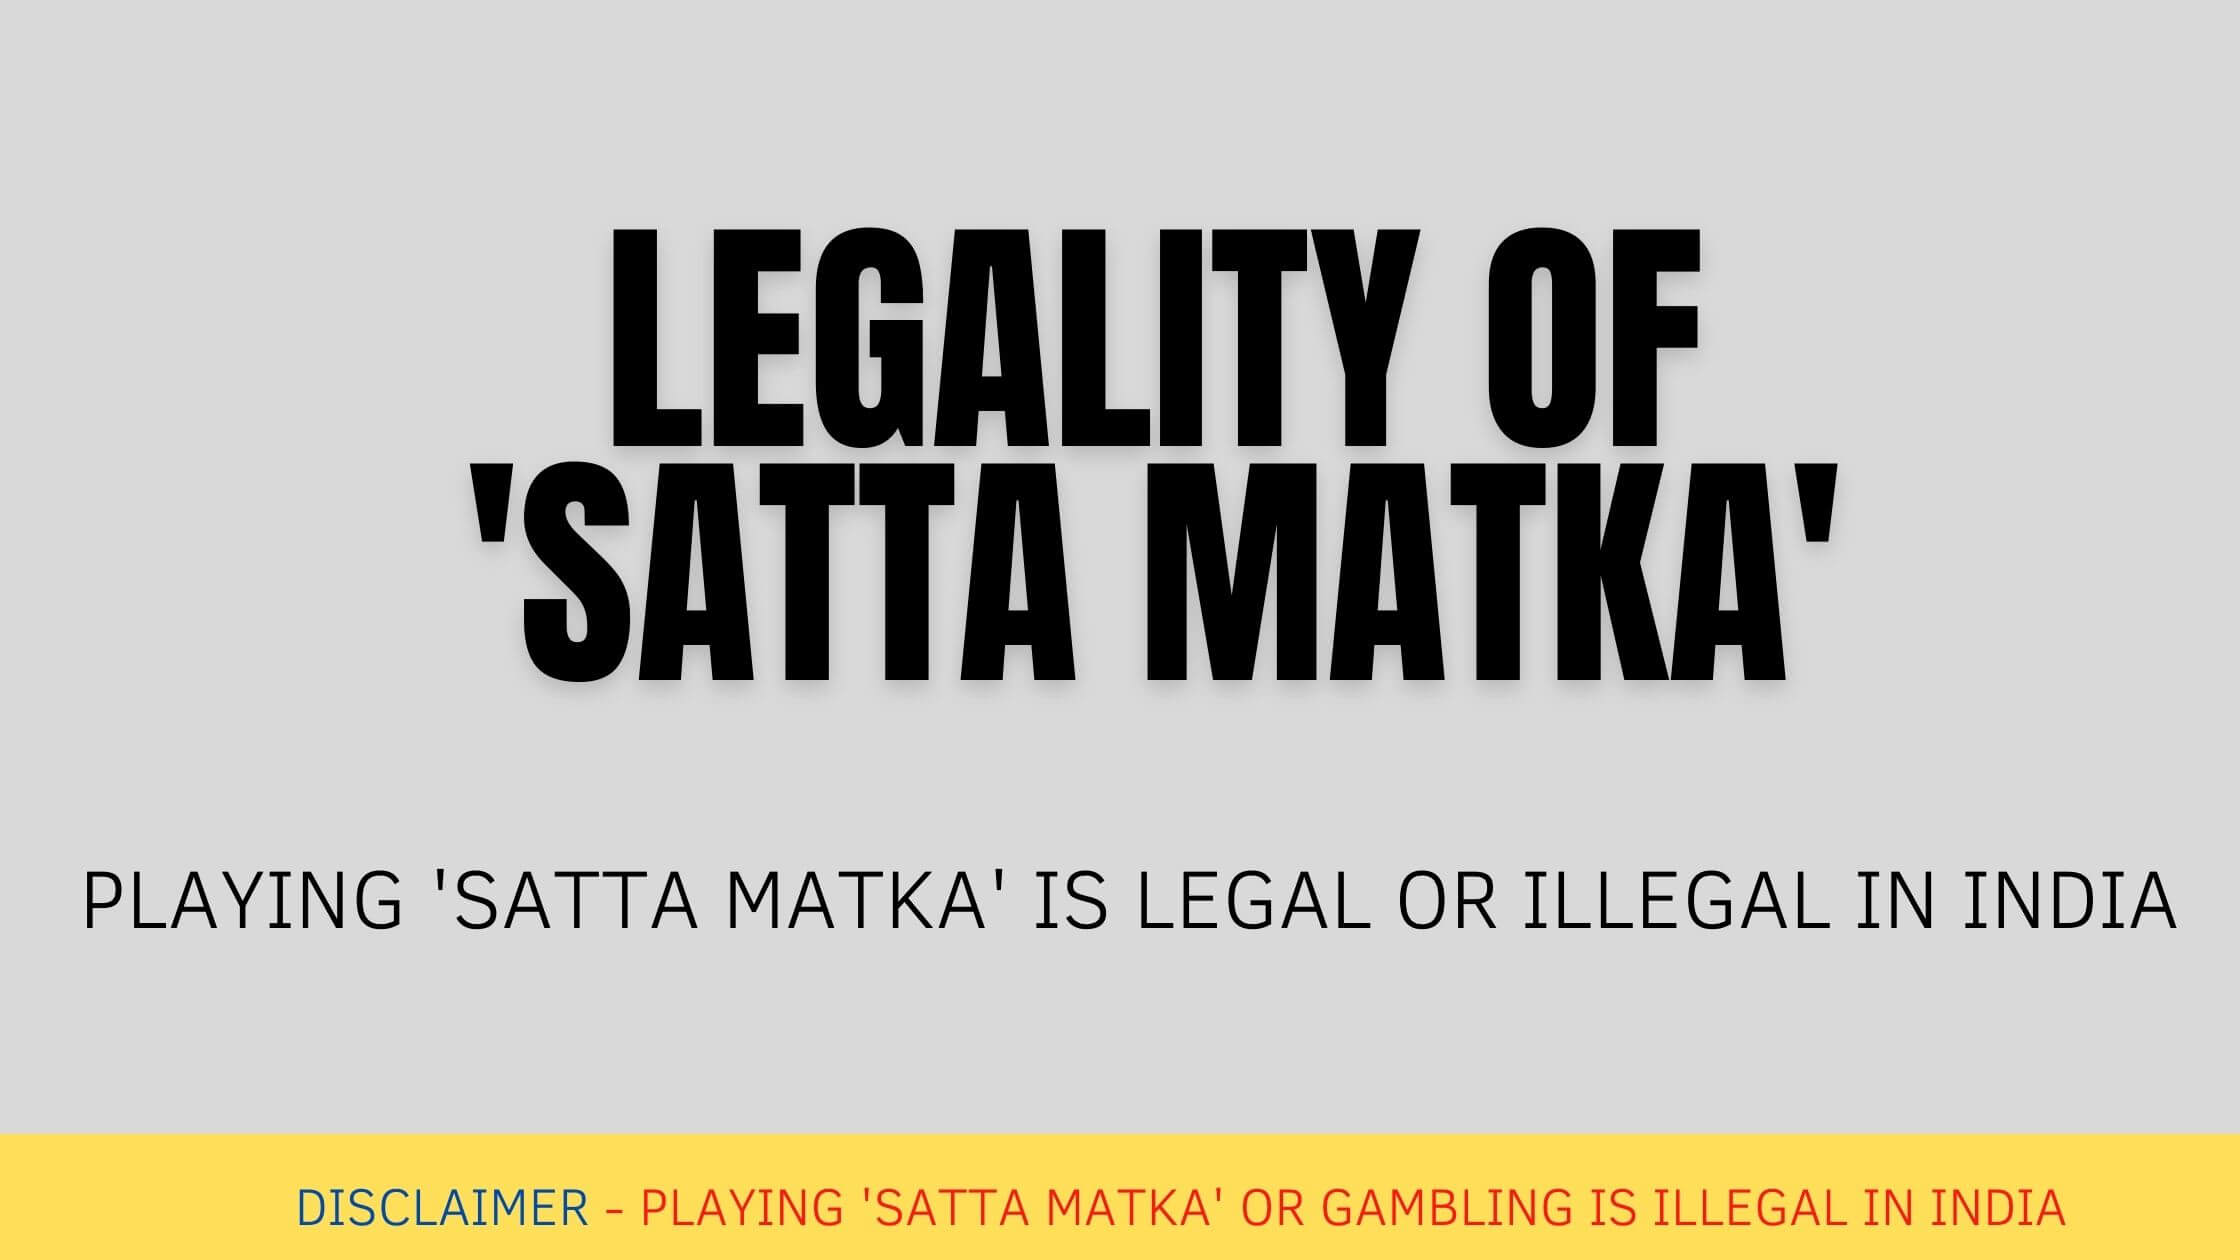 Is Satka Matka legal in India